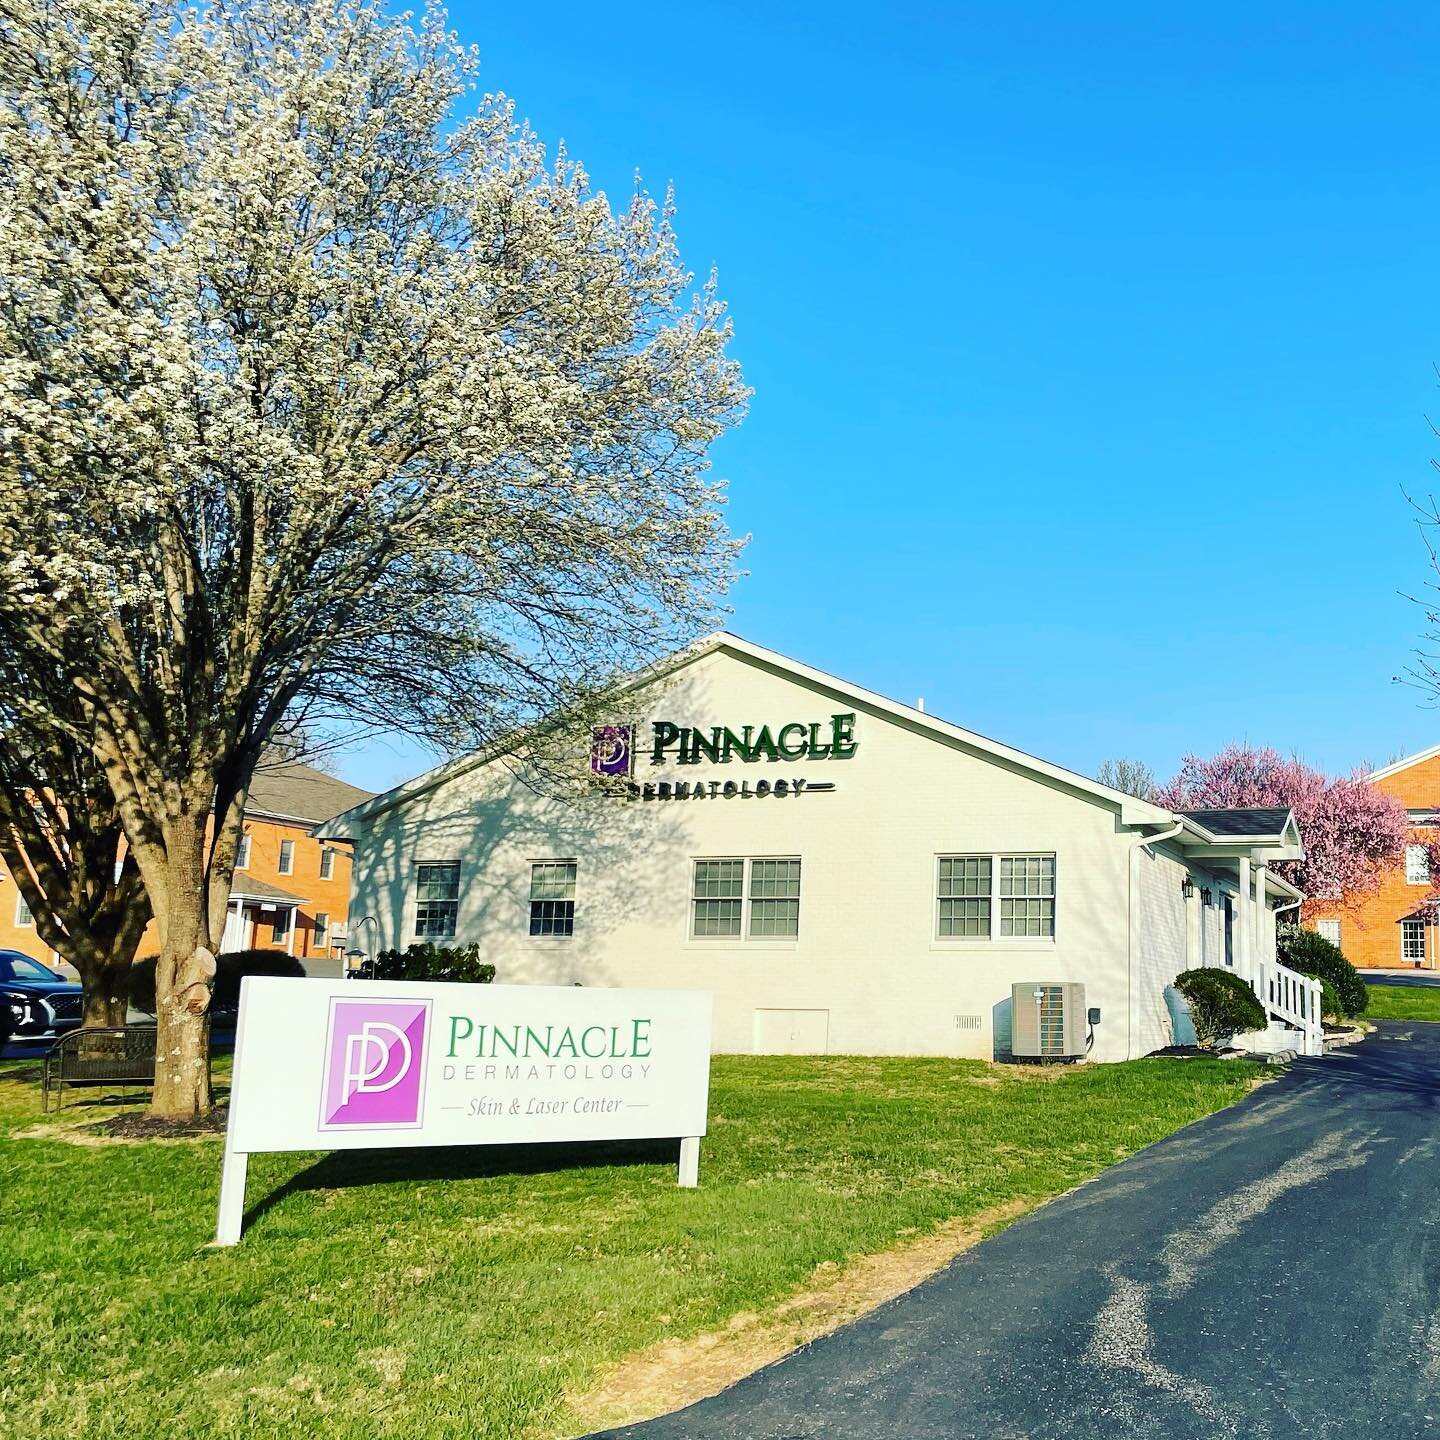 Spring is in bloom and Pinnacle has many new products and services coming your way! Stay tuned! Be healthy. Be beautiful. Be you #pinnacledermwv #spring #newlocation